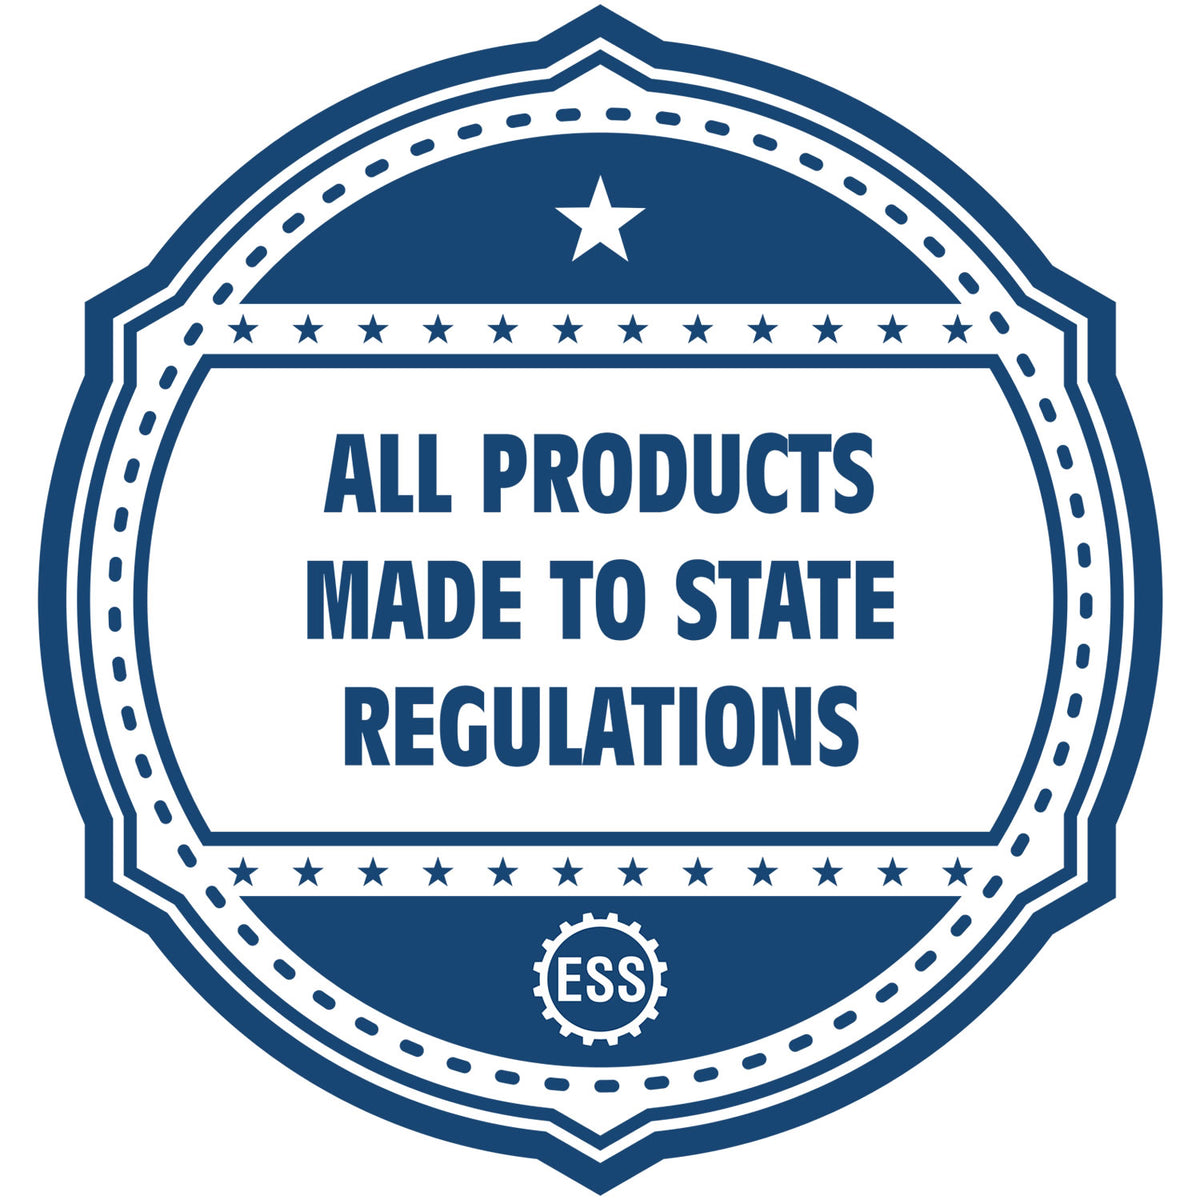 An icon or badge element for the MaxLight Premium Pre-Inked Alaska State Seal Notarial Stamp showing that this product is made in compliance with state regulations.